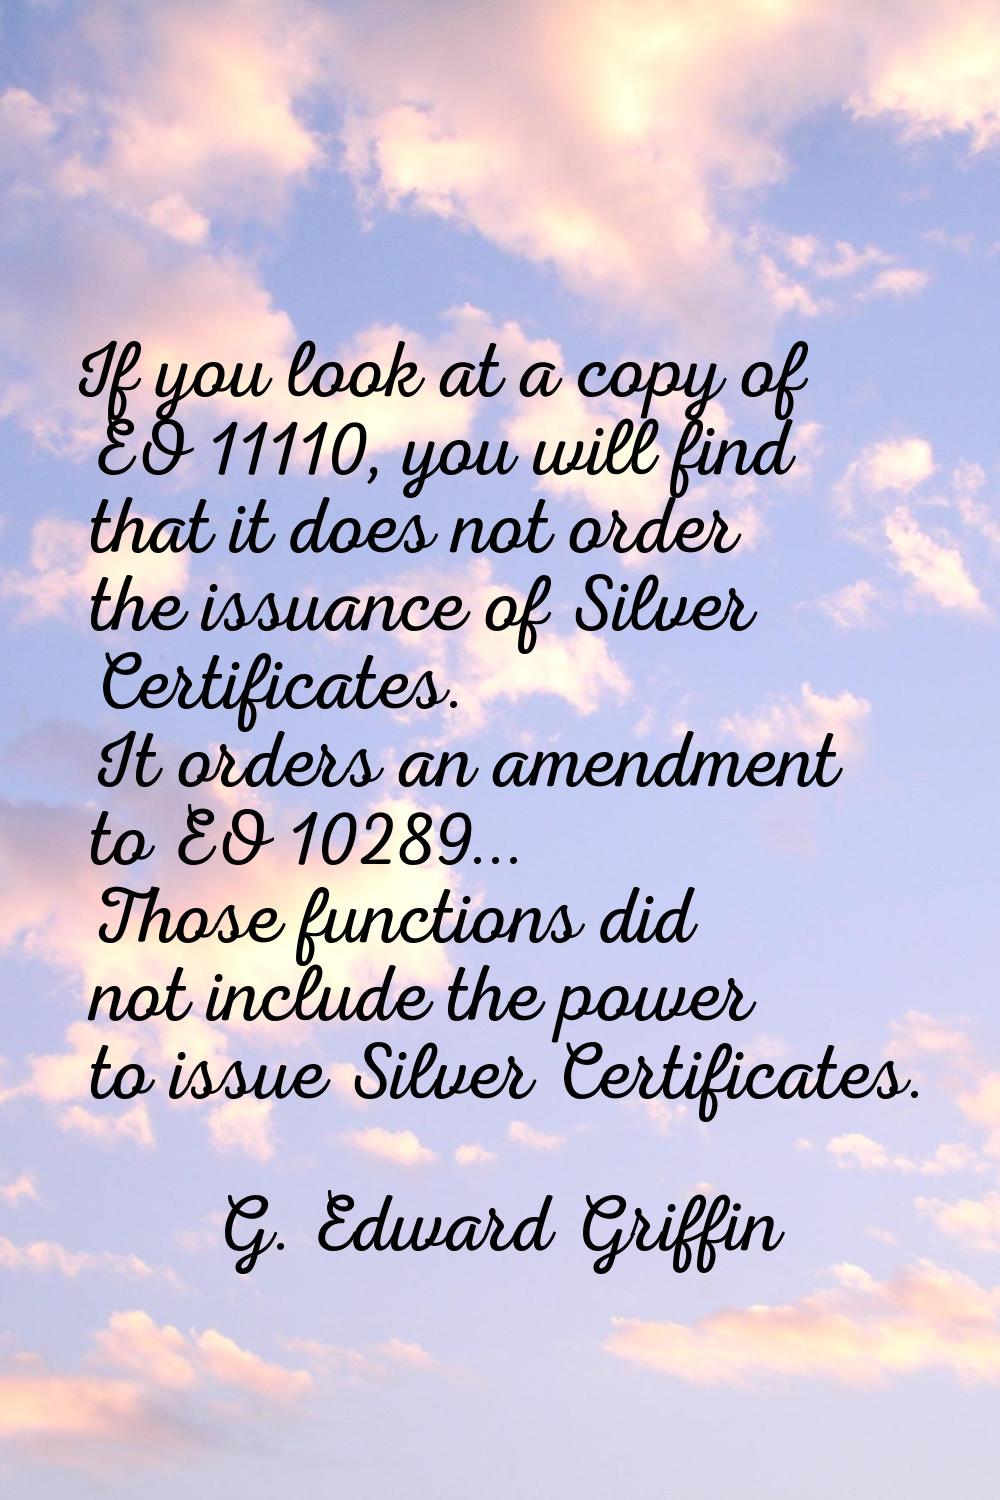 If you look at a copy of EO 11110, you will find that it does not order the issuance of Silver Cert